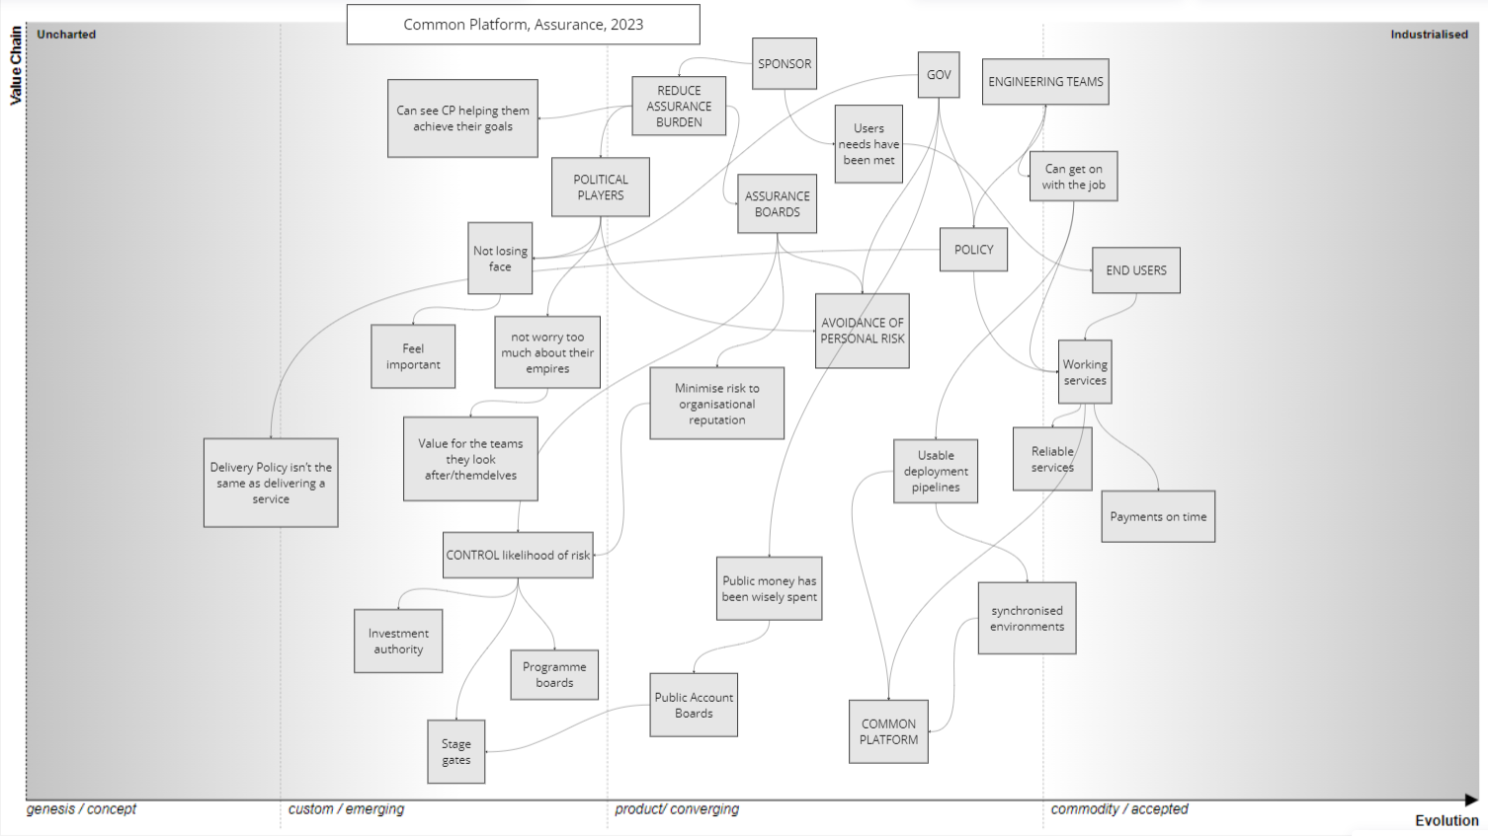 A 30-sqaure mind map of the standard platform from an assurance perspective